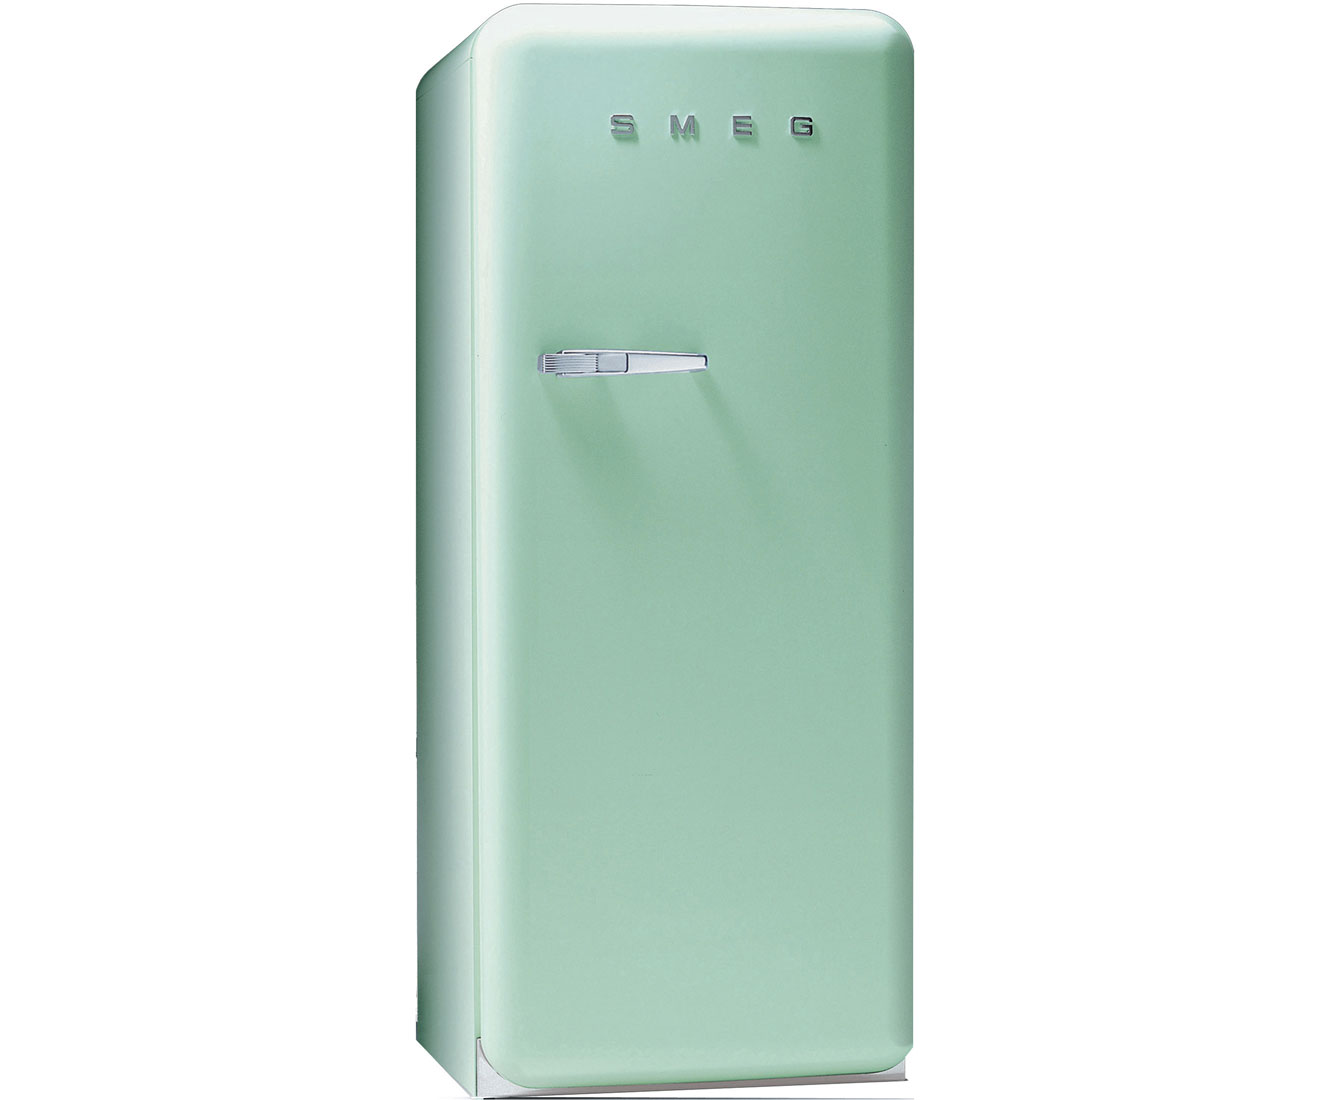 Smeg Right Hand Hinge FAB28QV1 Fridge with Ice Box Review